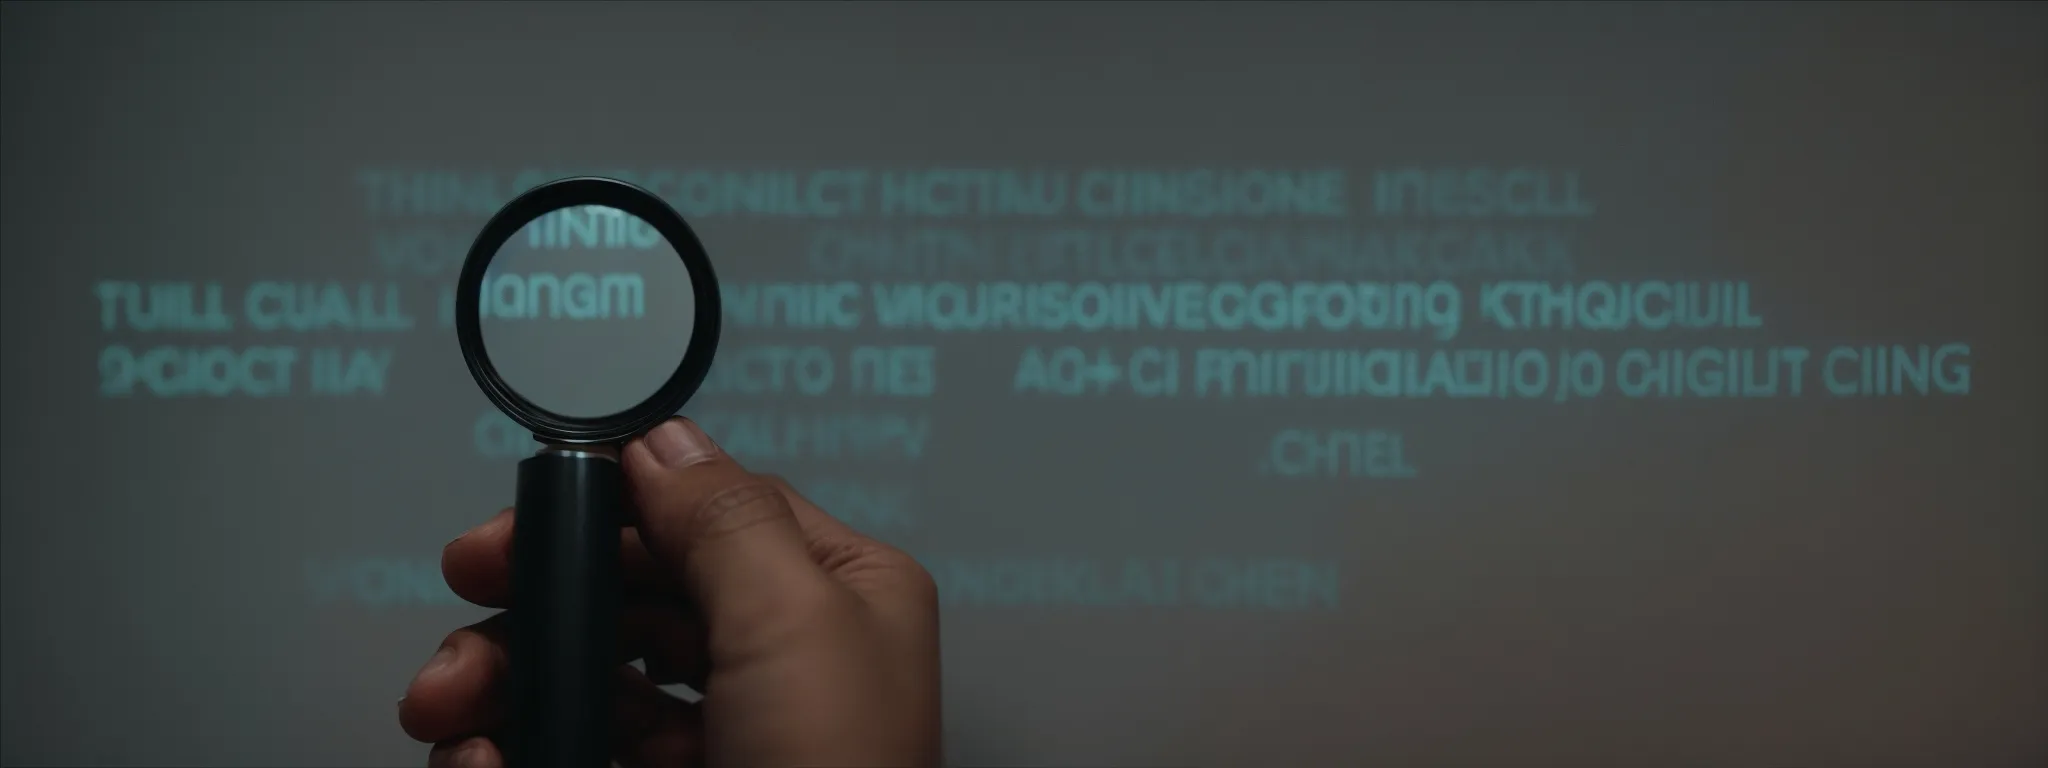 a close-up shot of a person's hand using a magnifying glass to focus on a cluster of bright, interconnected keywords floating above a digital screen.